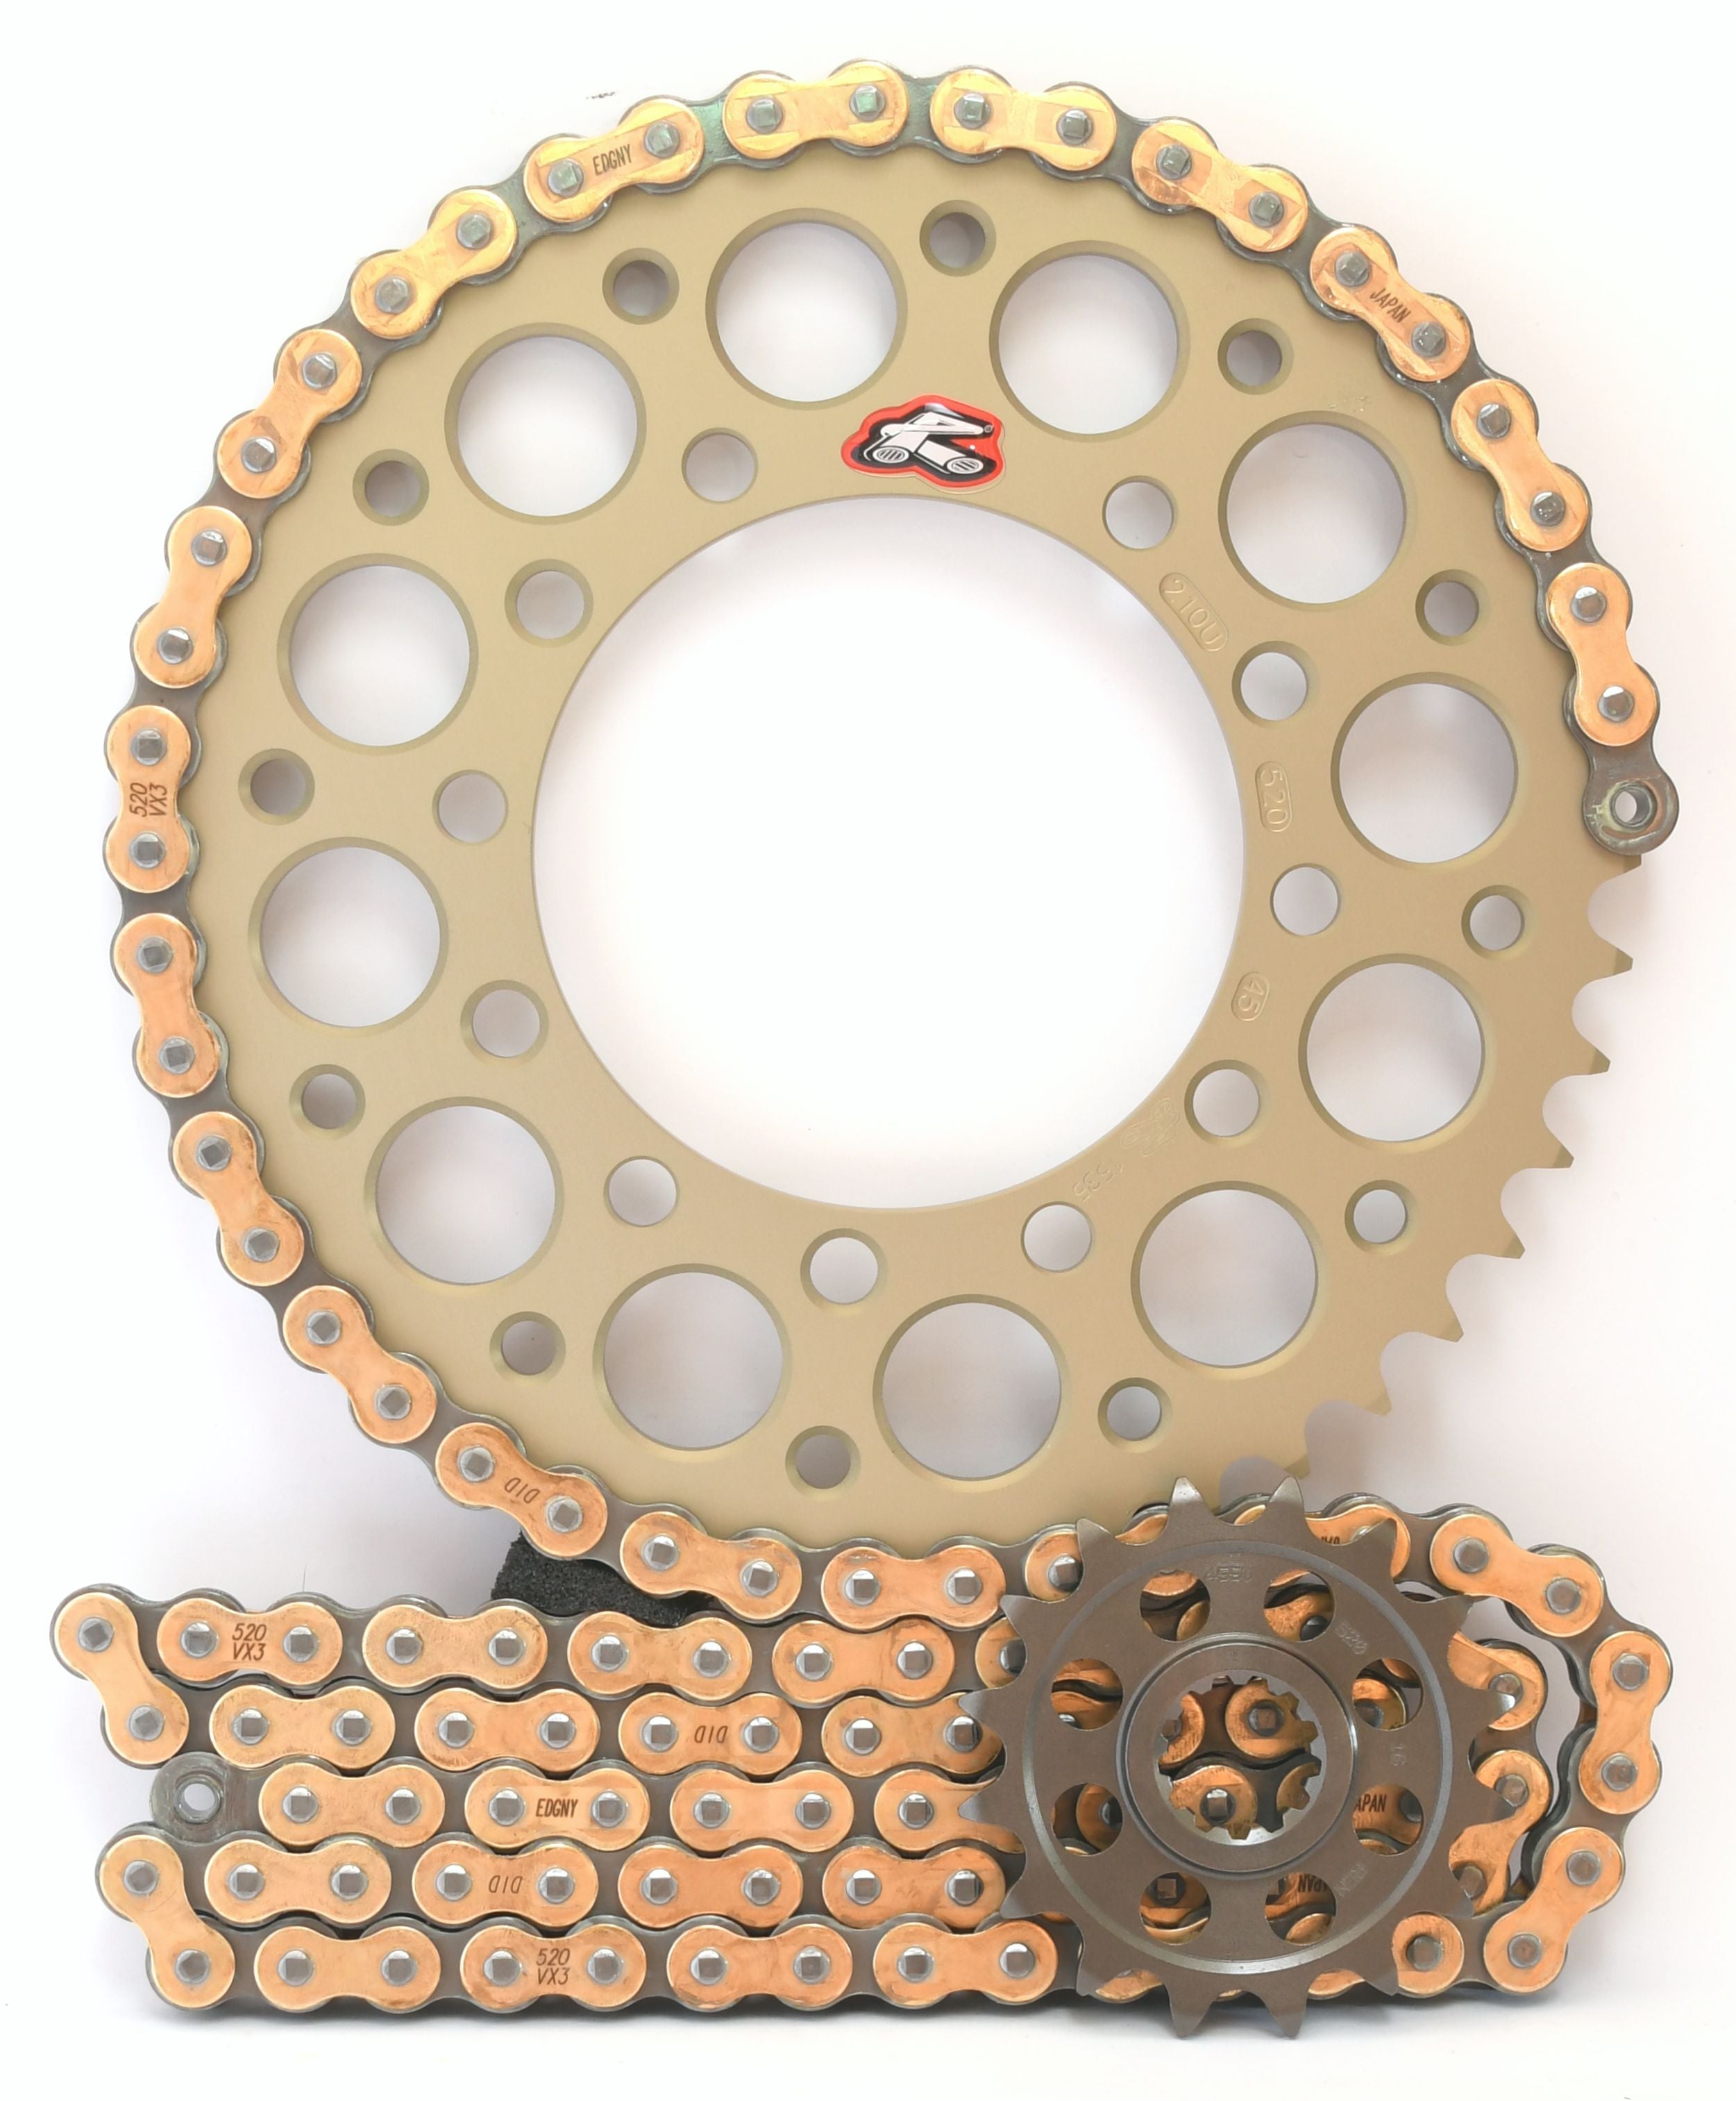 Renthal Ultralight and DID 520 Conversion Chain & Sprocket Kit for Suzuki GSX-R1000 2017> - Standard Gearing